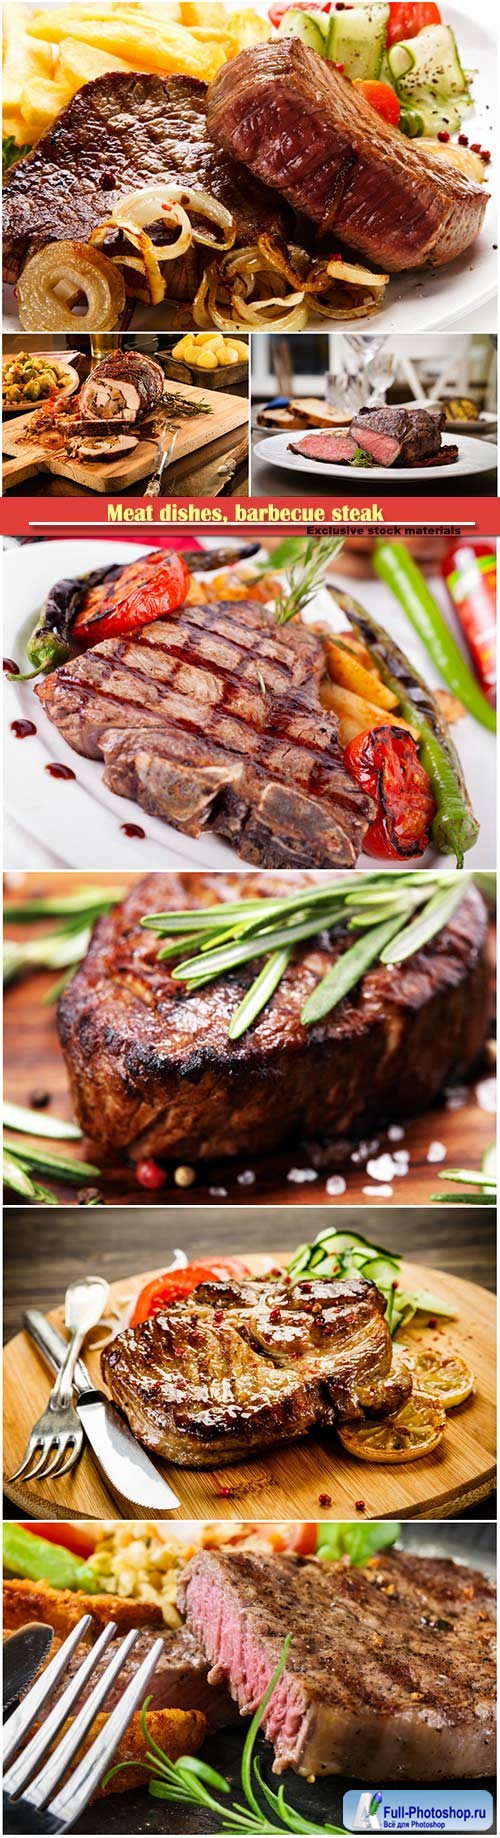 Meat dishes, barbecue steak